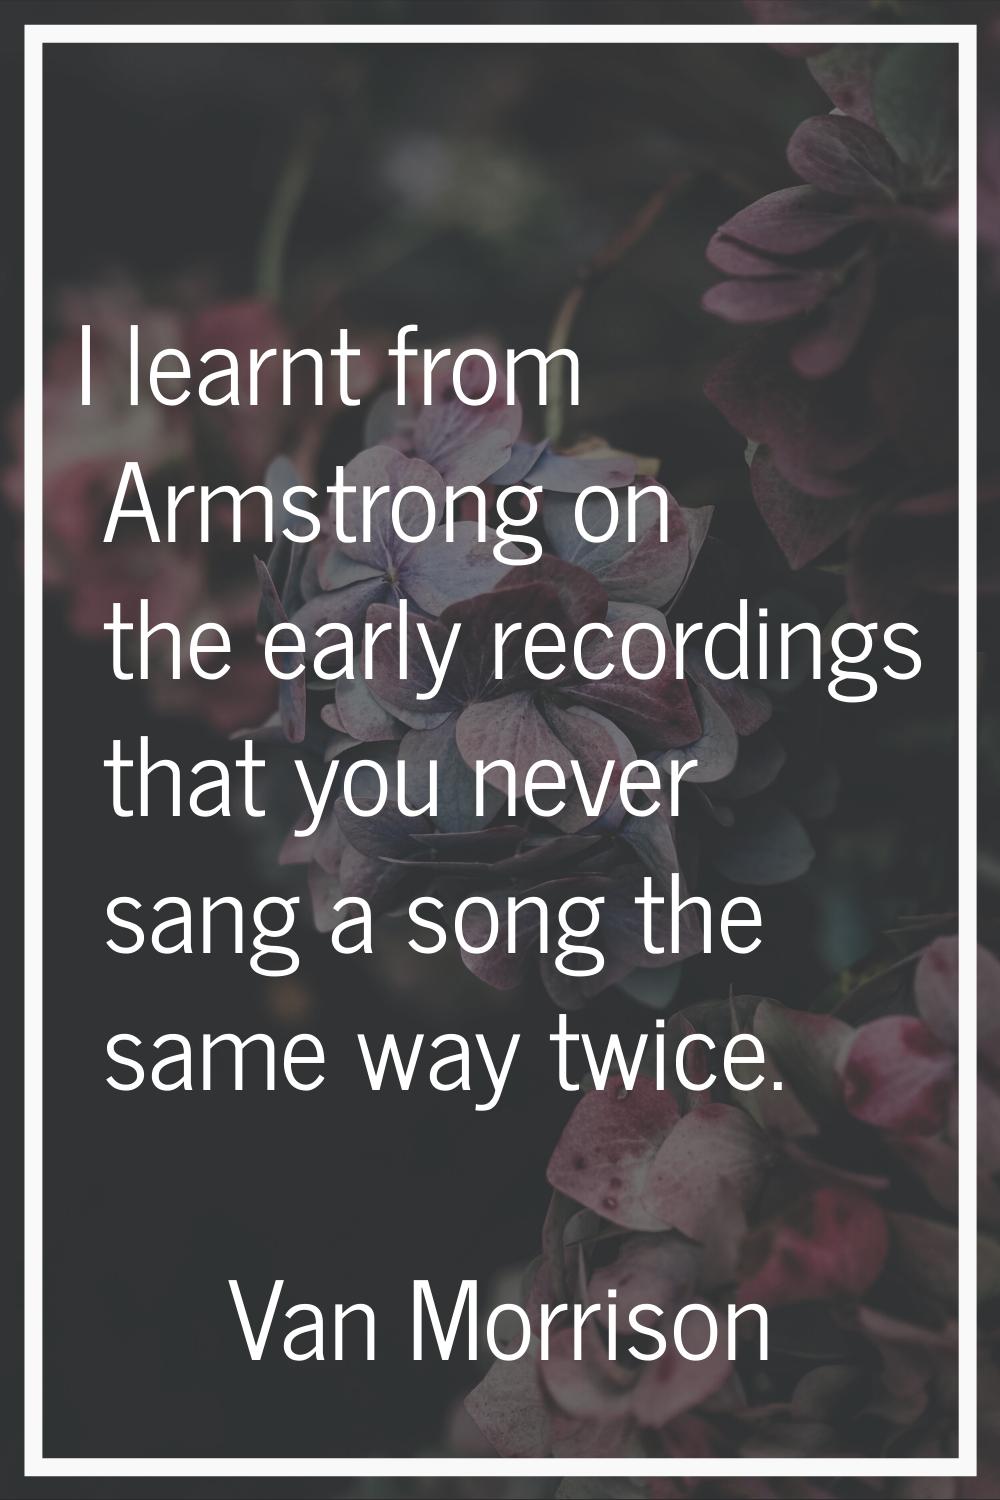 I learnt from Armstrong on the early recordings that you never sang a song the same way twice.